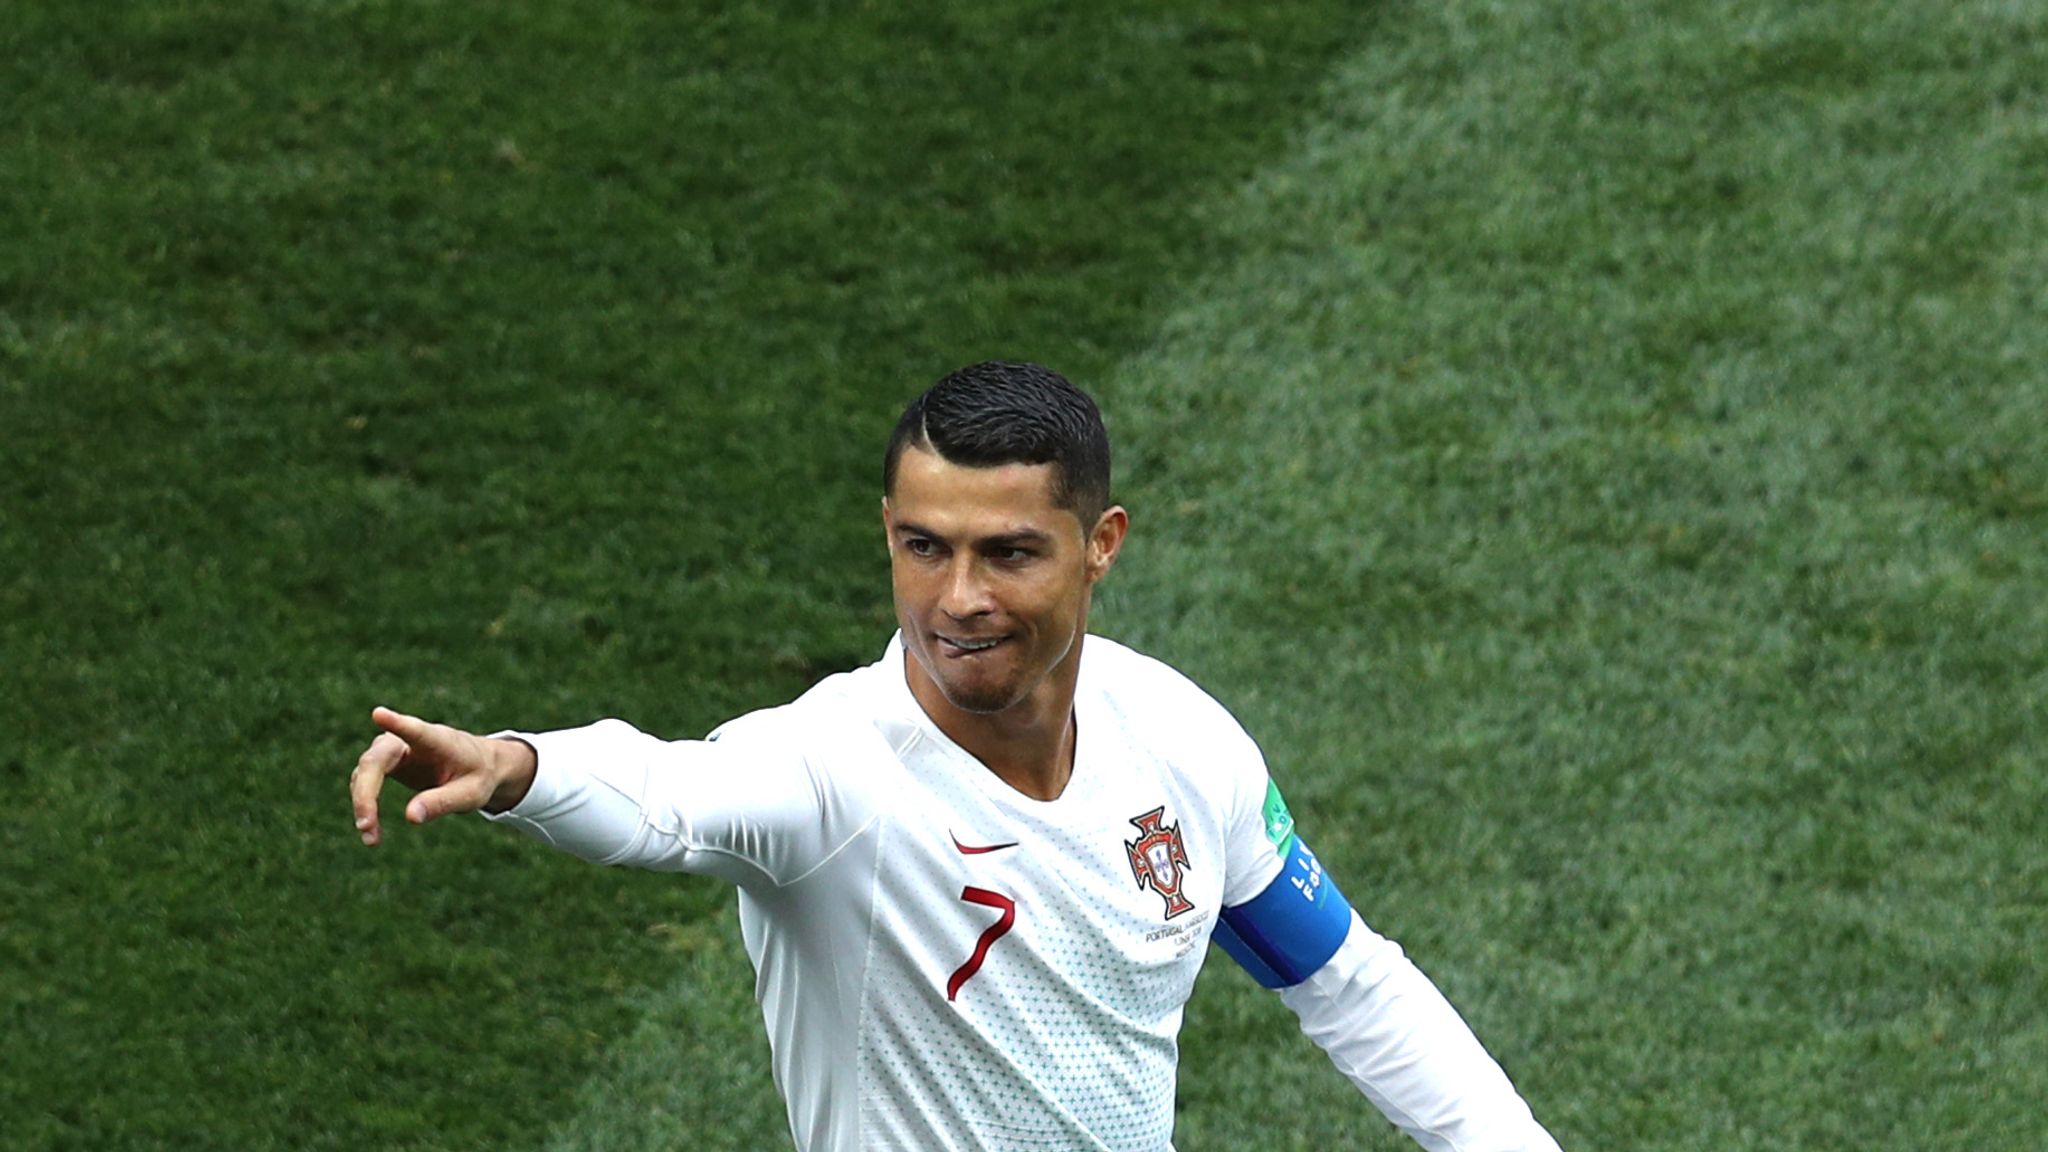 FIFA deny claims World Cup referee asked for Cristiano Ronaldo's